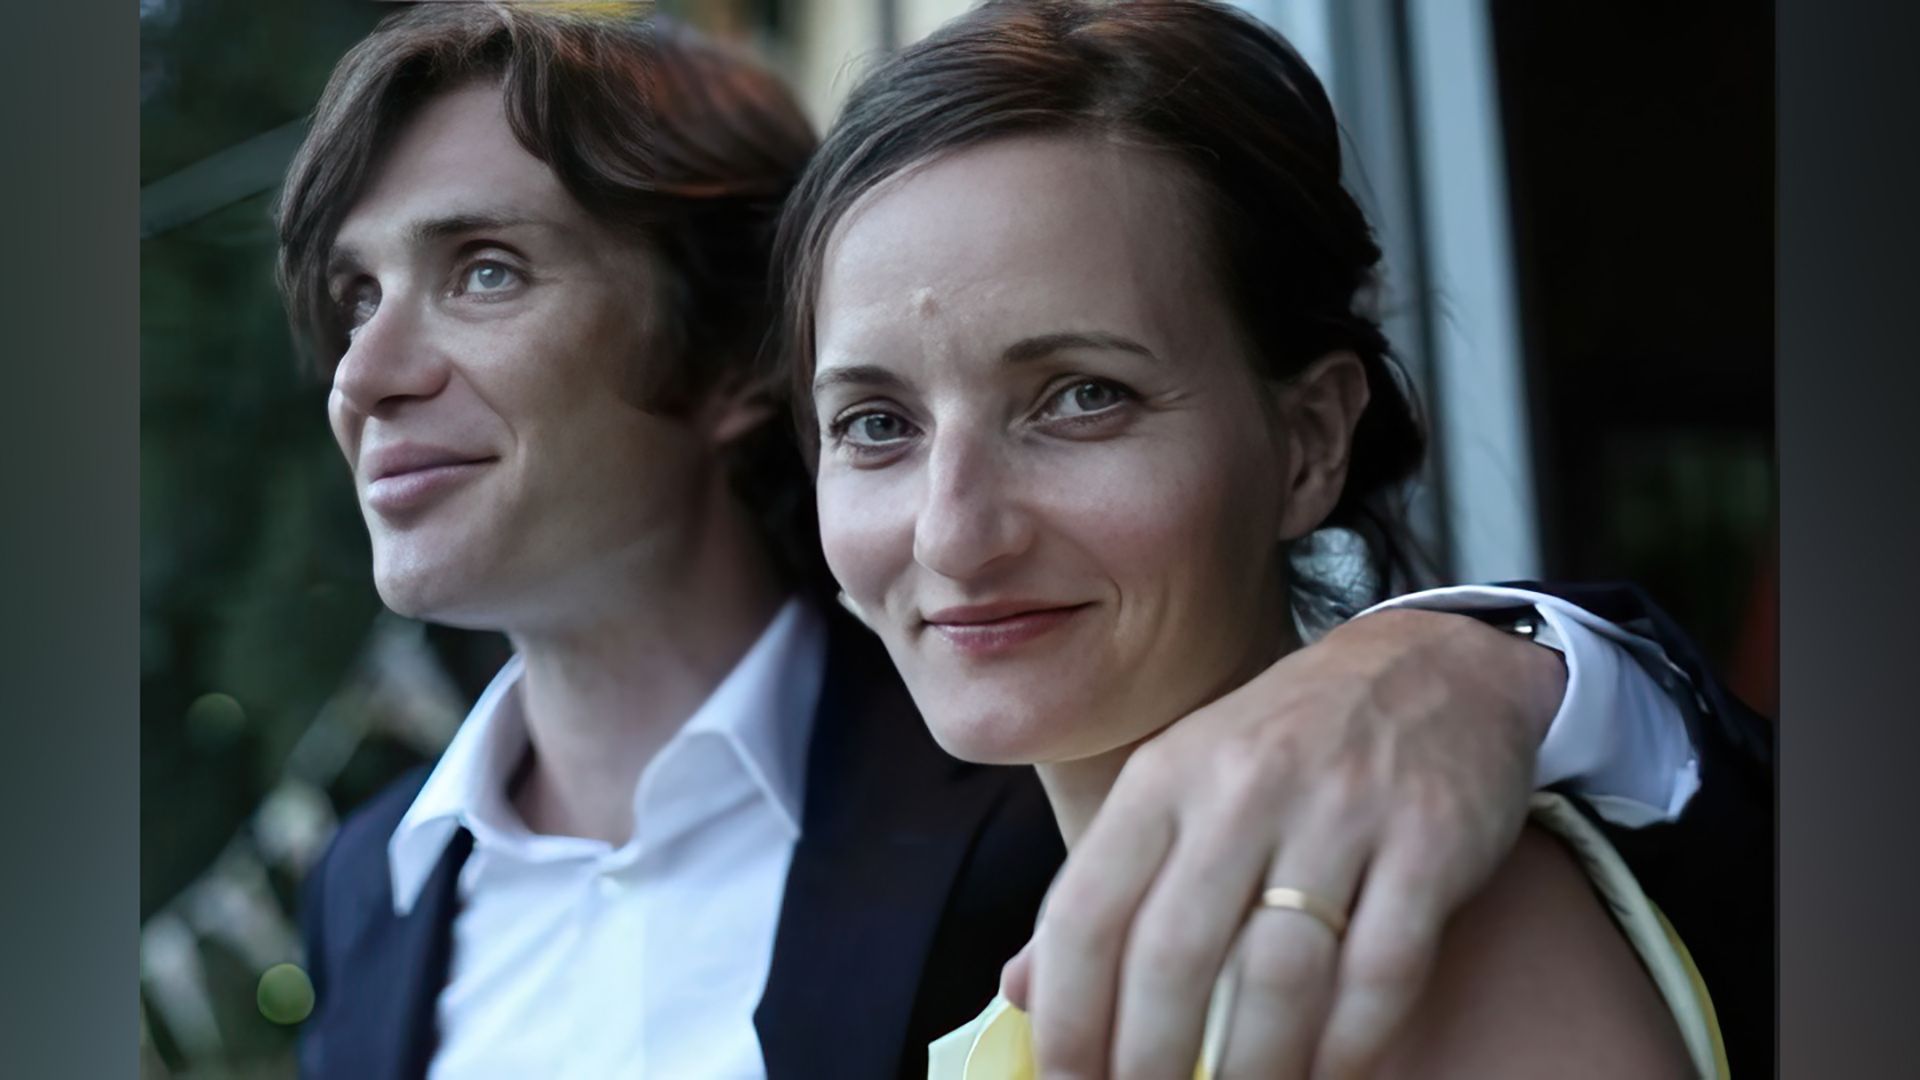 Cillian Murphy with his wife